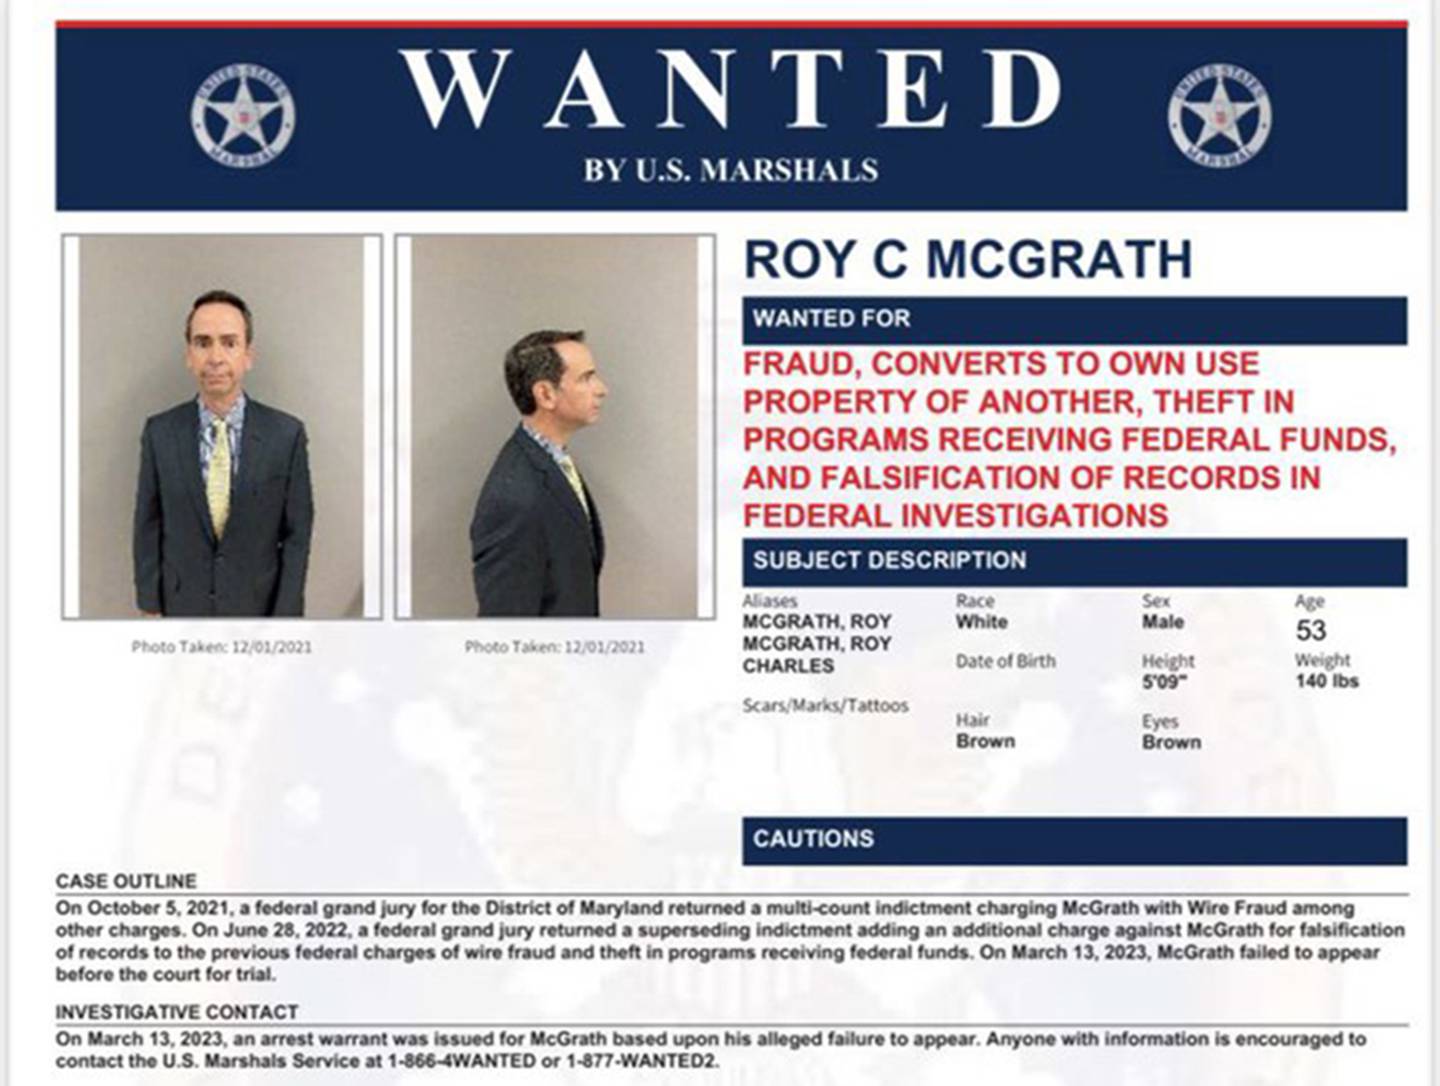 U.S. Marshals WANTED poster for Roy McGrath.